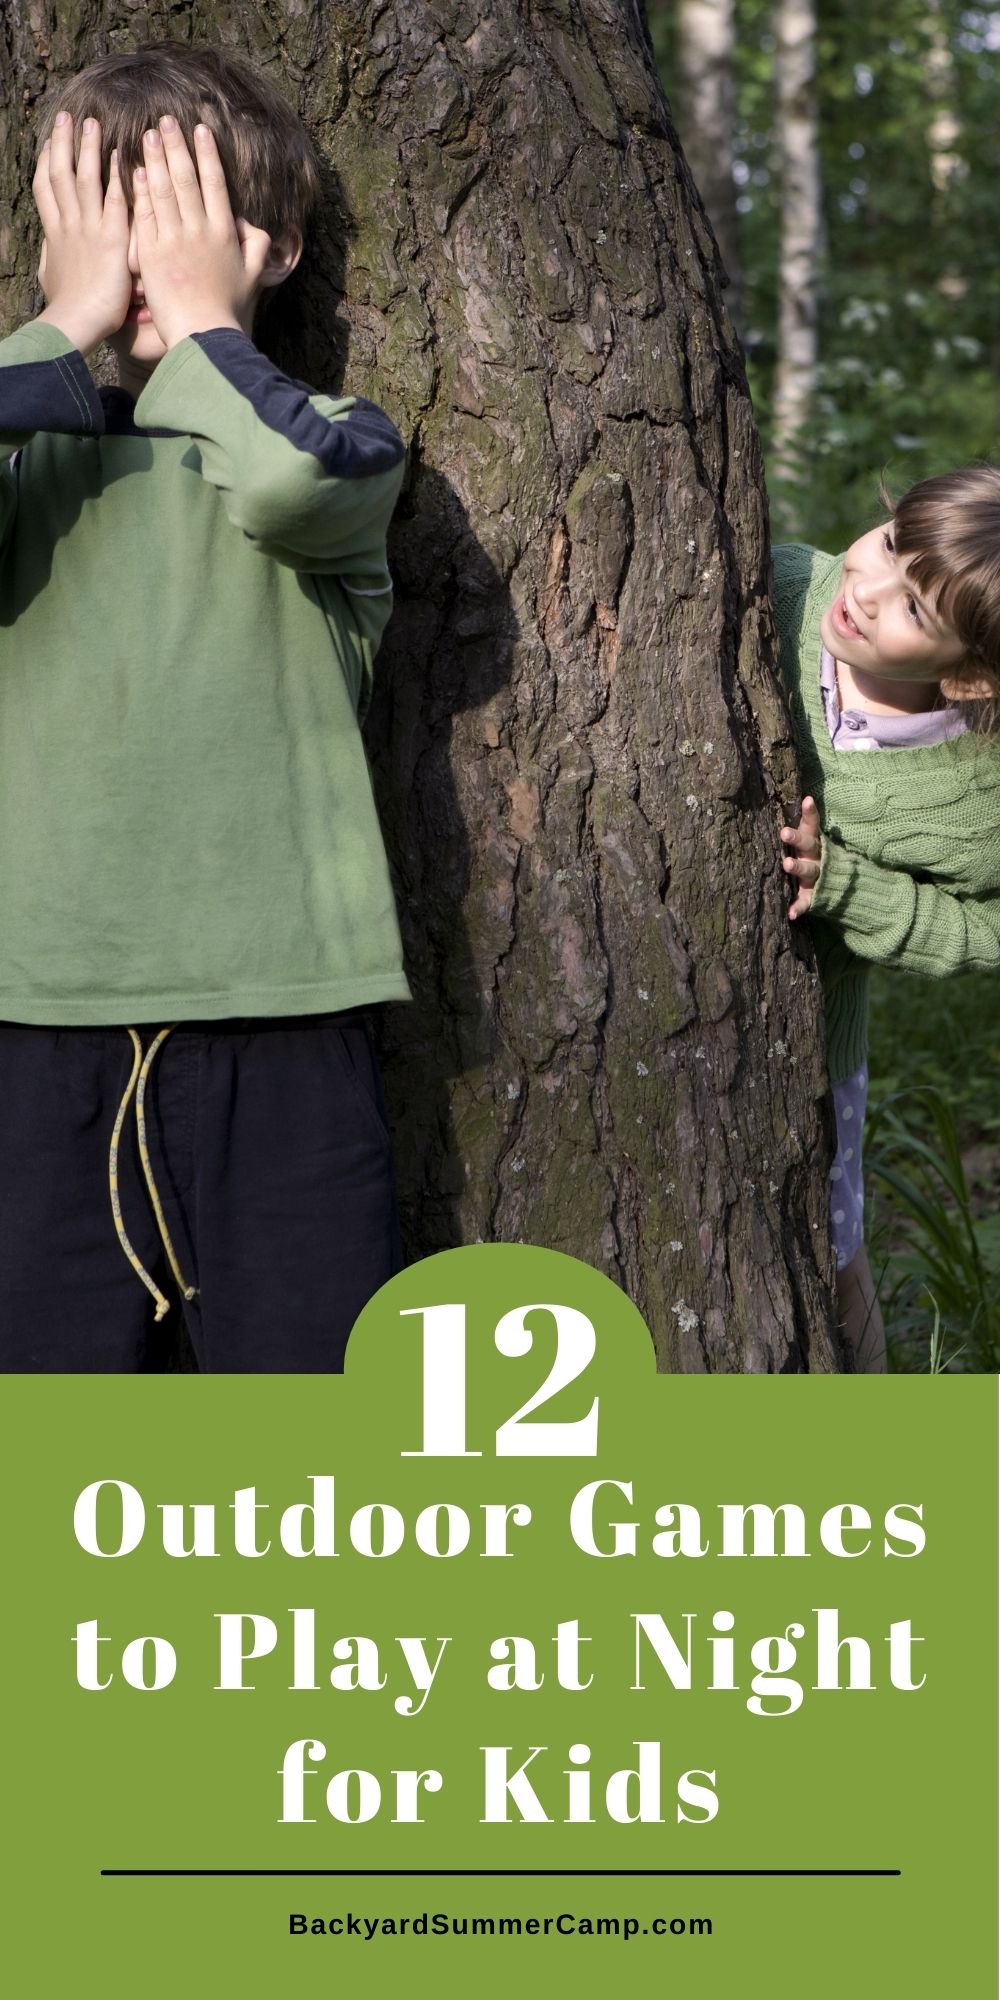 2 kids playing hide and seek behind a tree with text overlay that reads "12 outdoor game to play at night for kids."